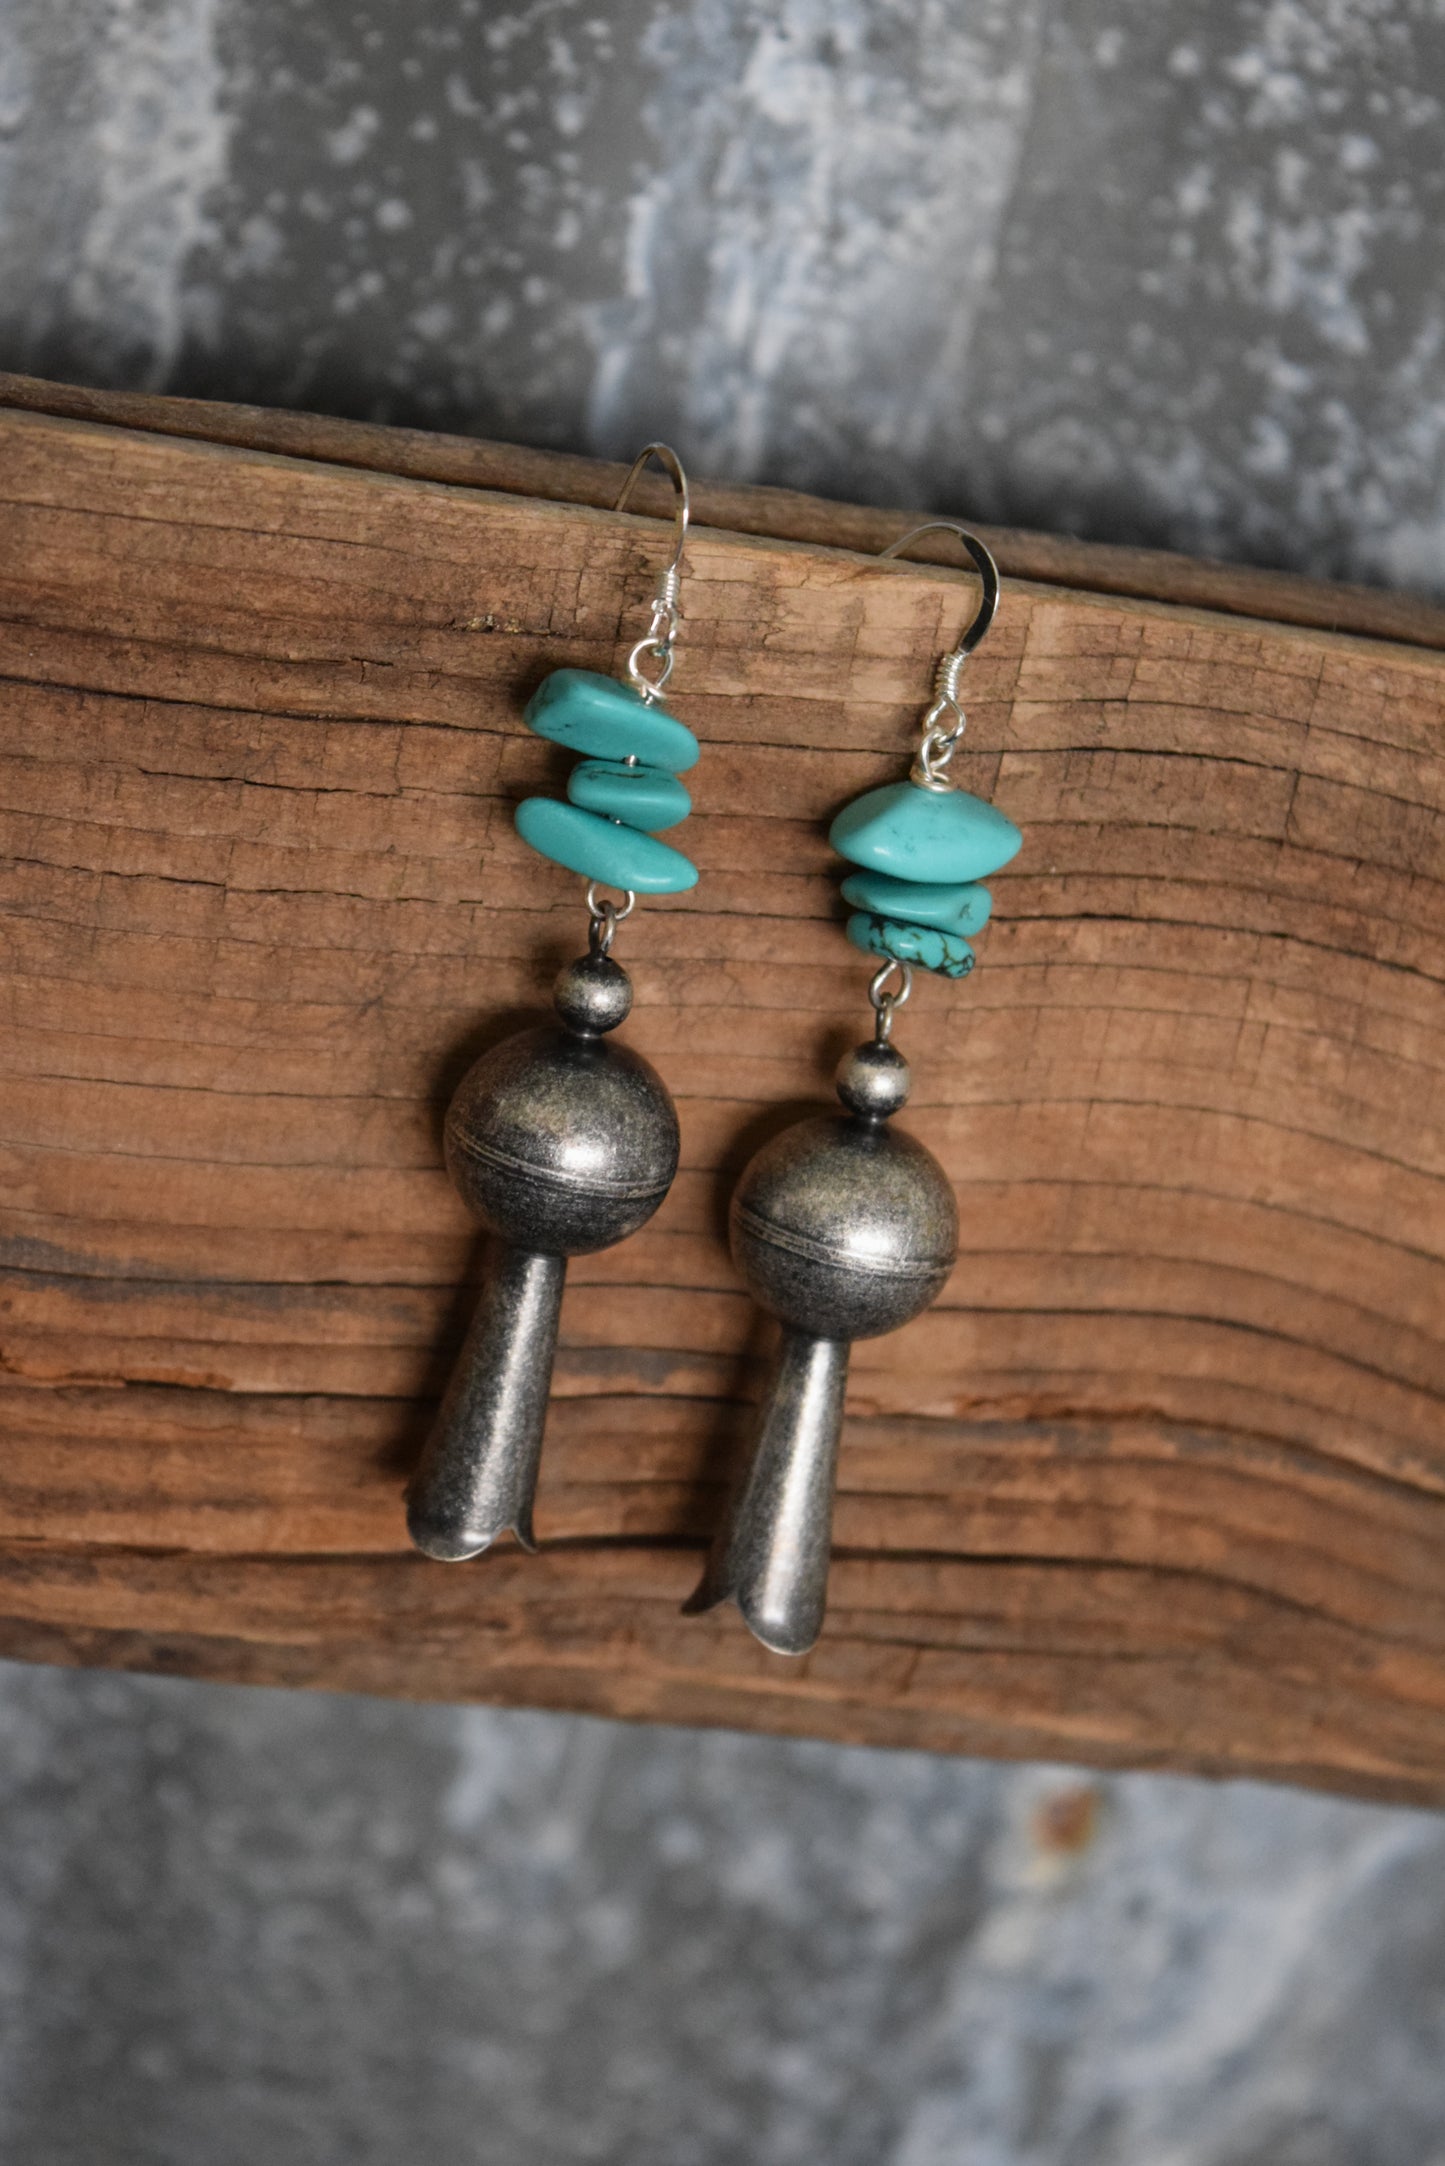 The Turquoise Rock Blossom Earrings